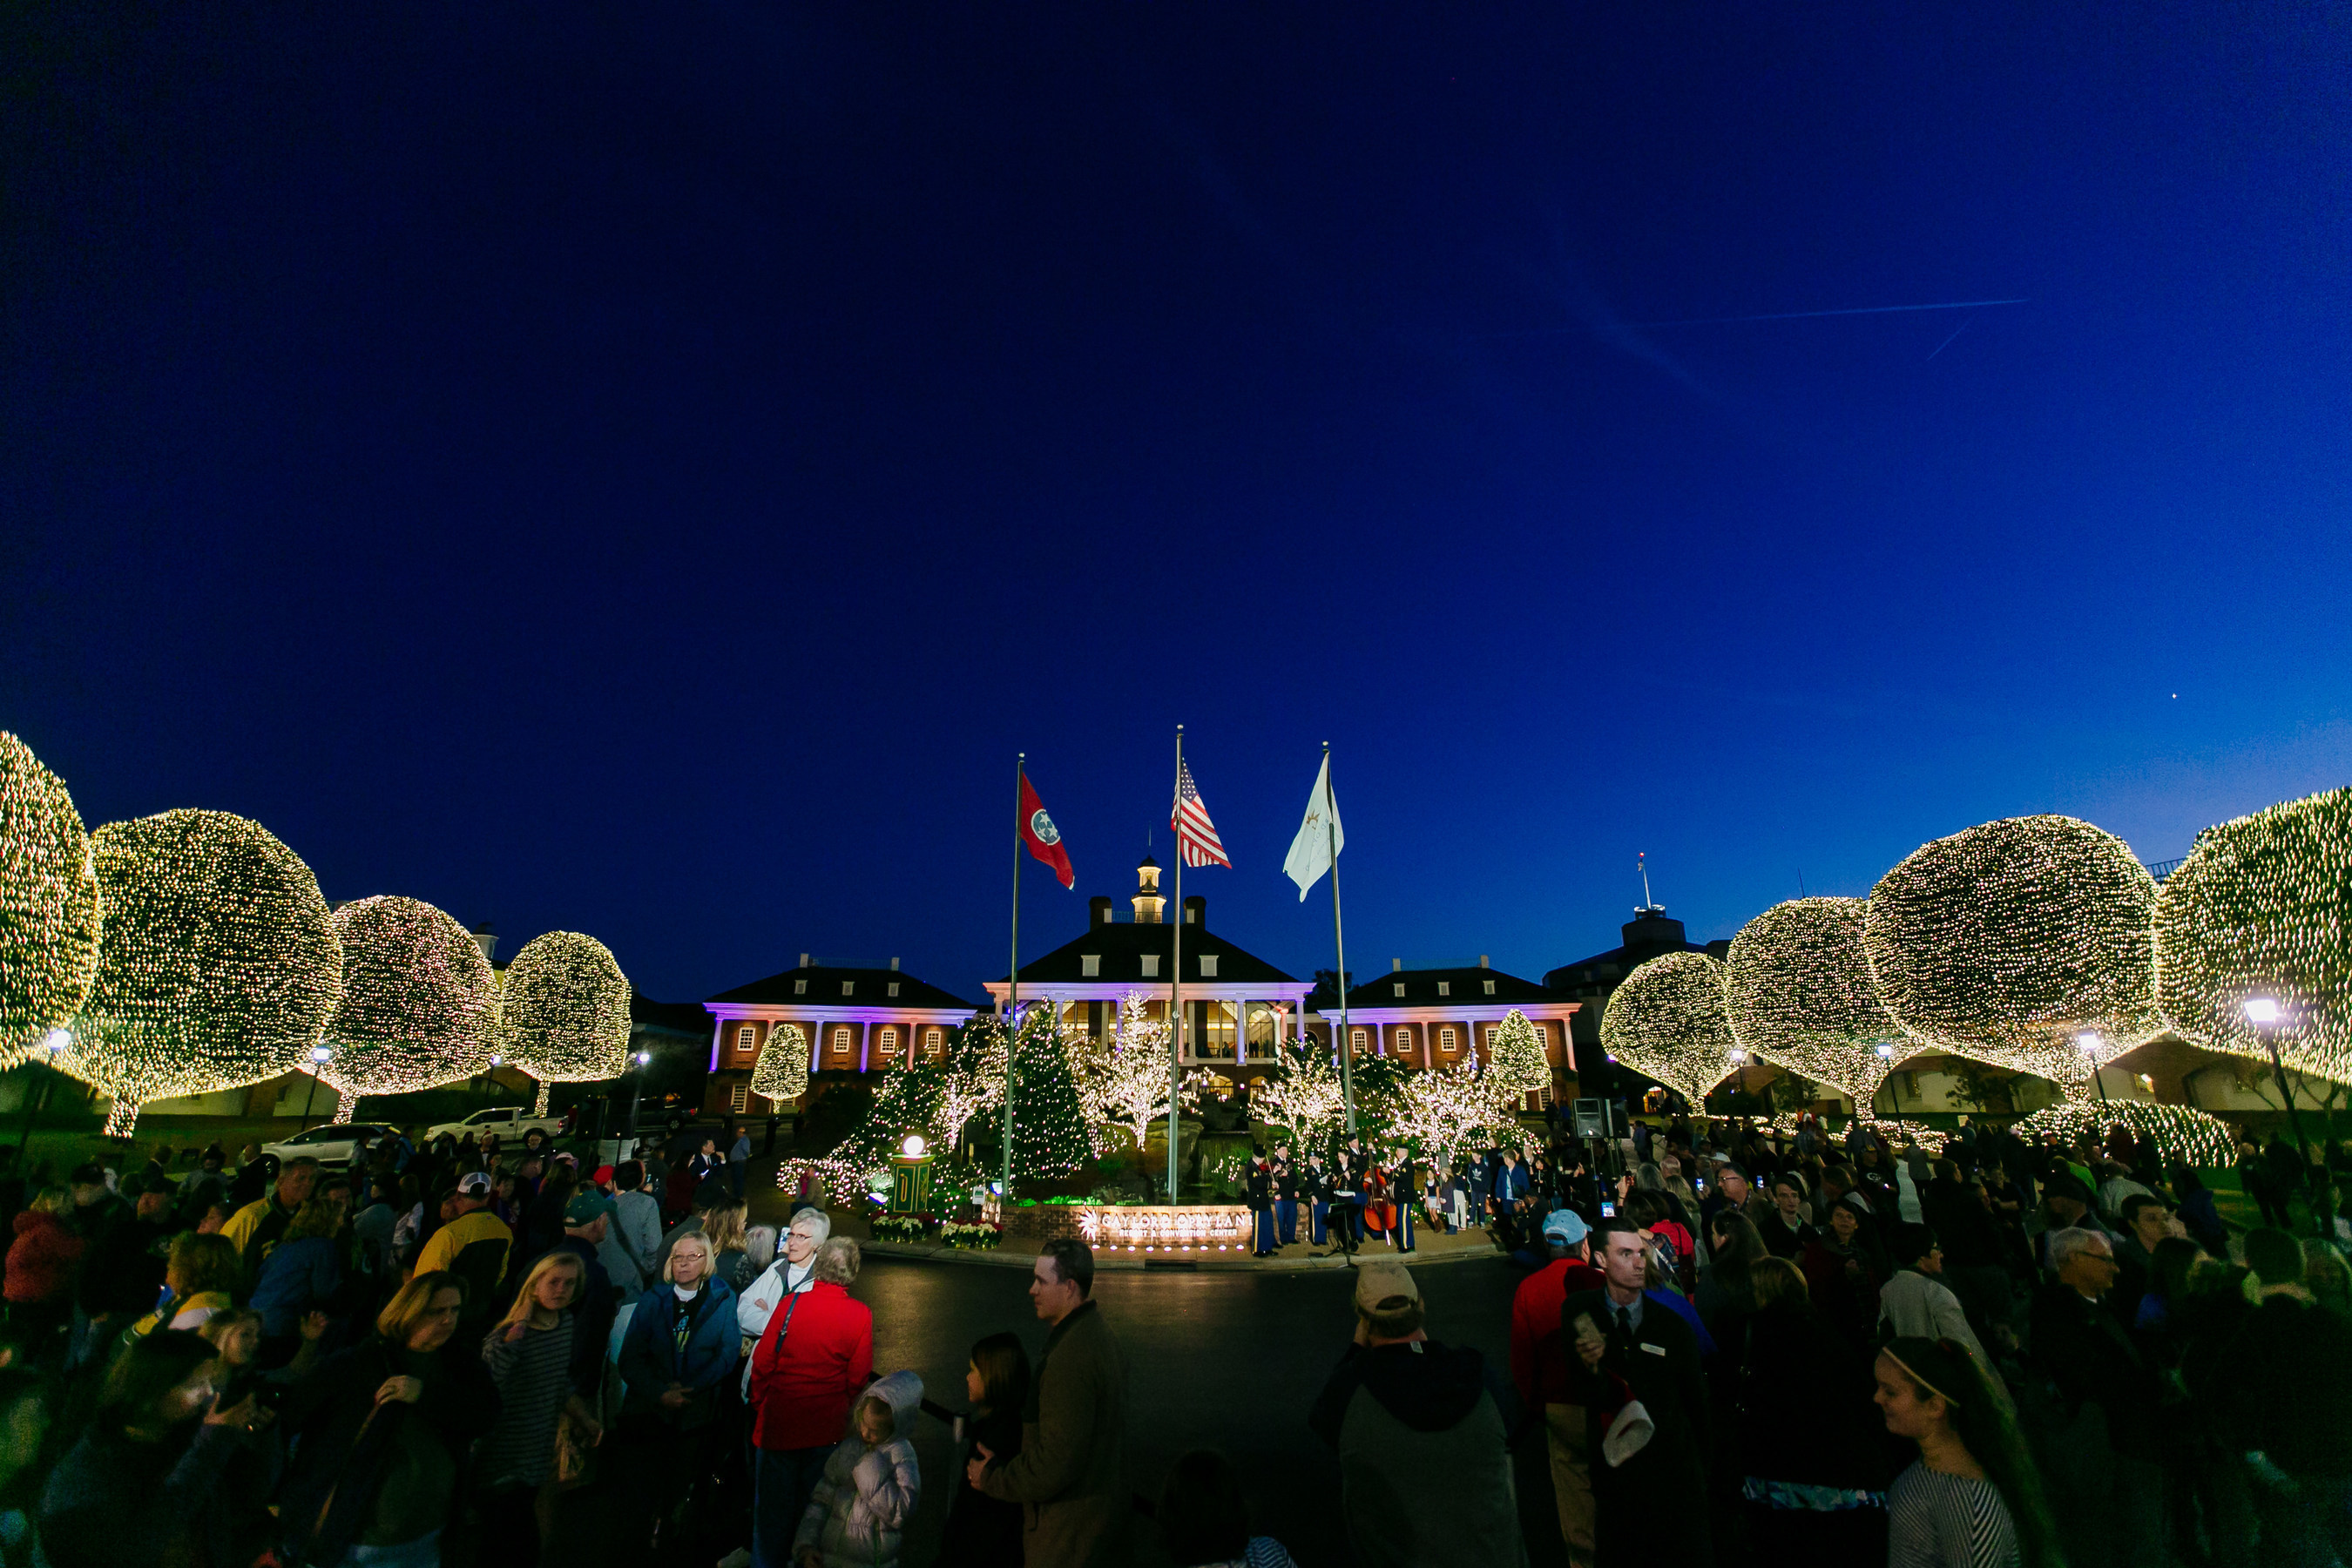 Have Yourself a Very Country Christmas at Gaylord Opryland Resort